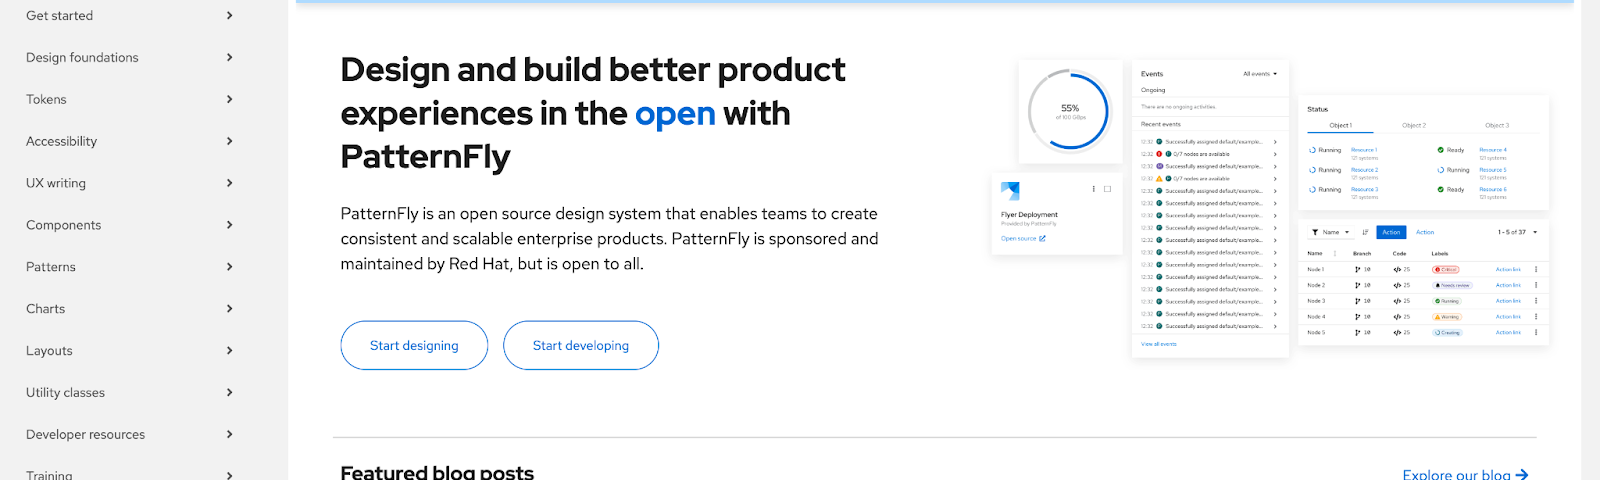 Image of the new PatternFly homepage.